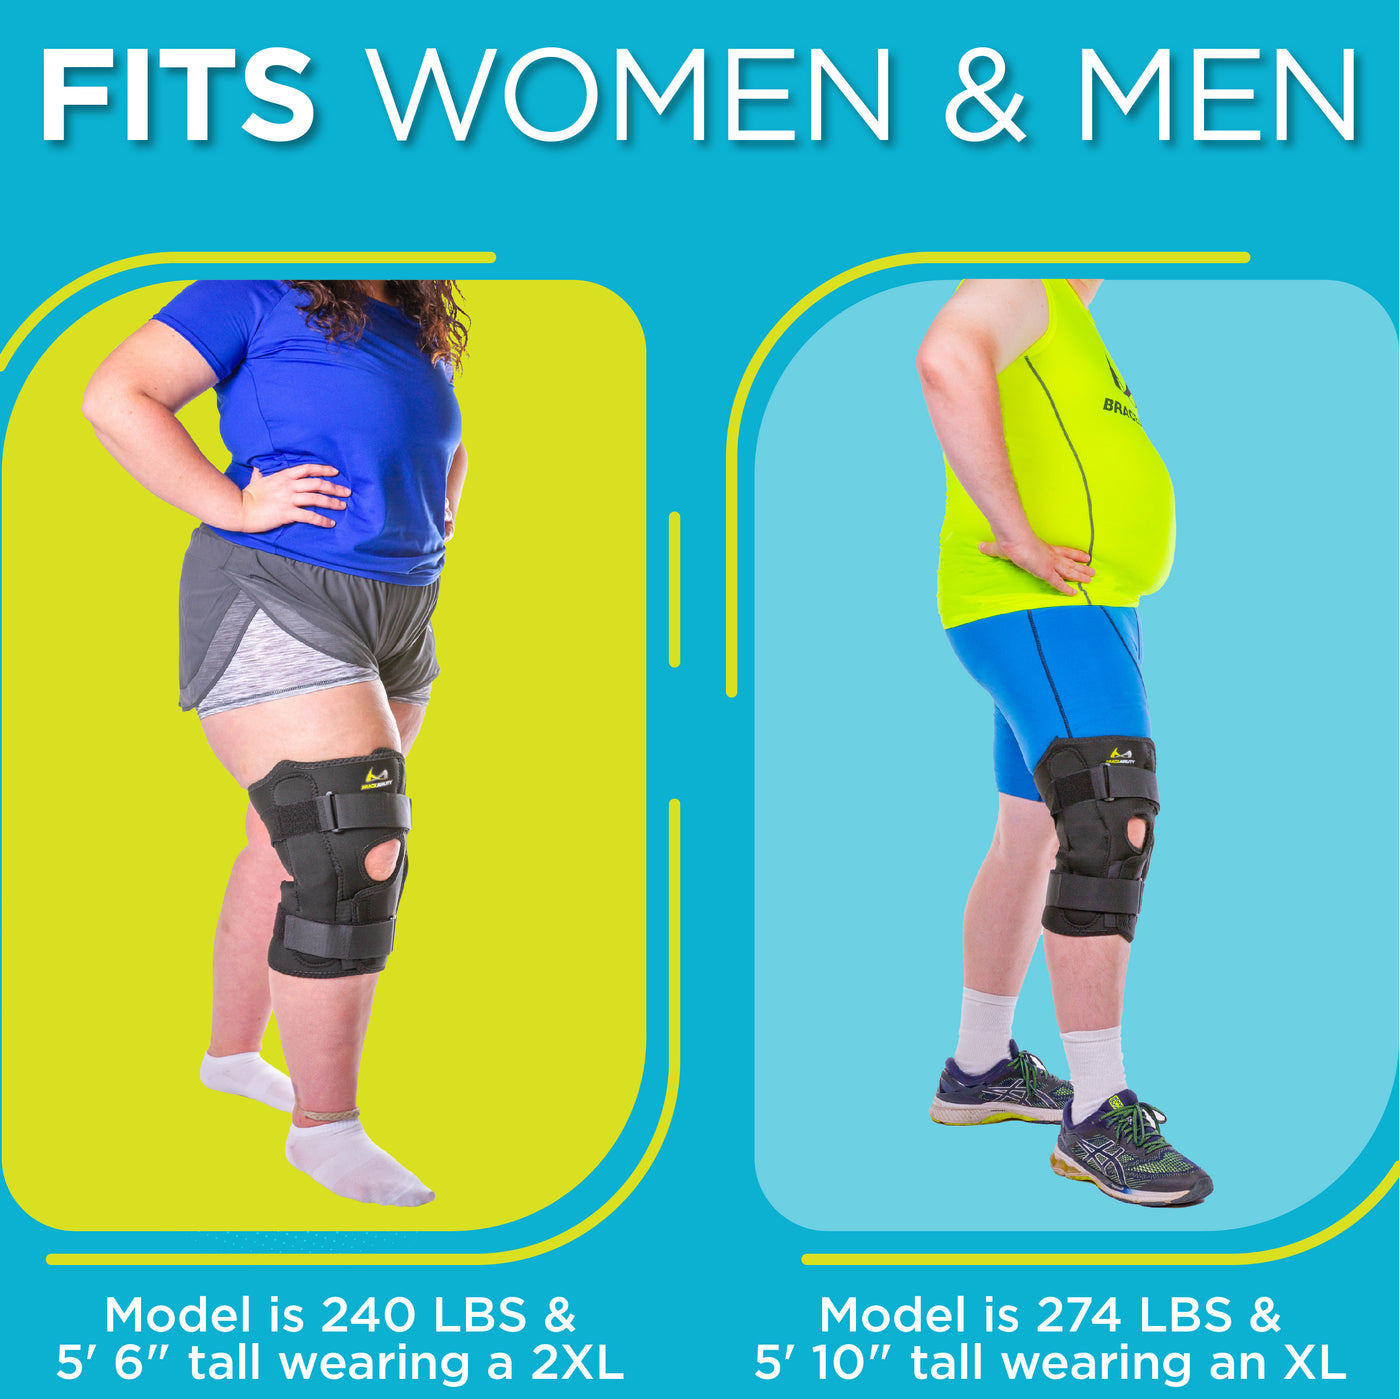 Our obesity knee brace for osteoarthritis fits women and men